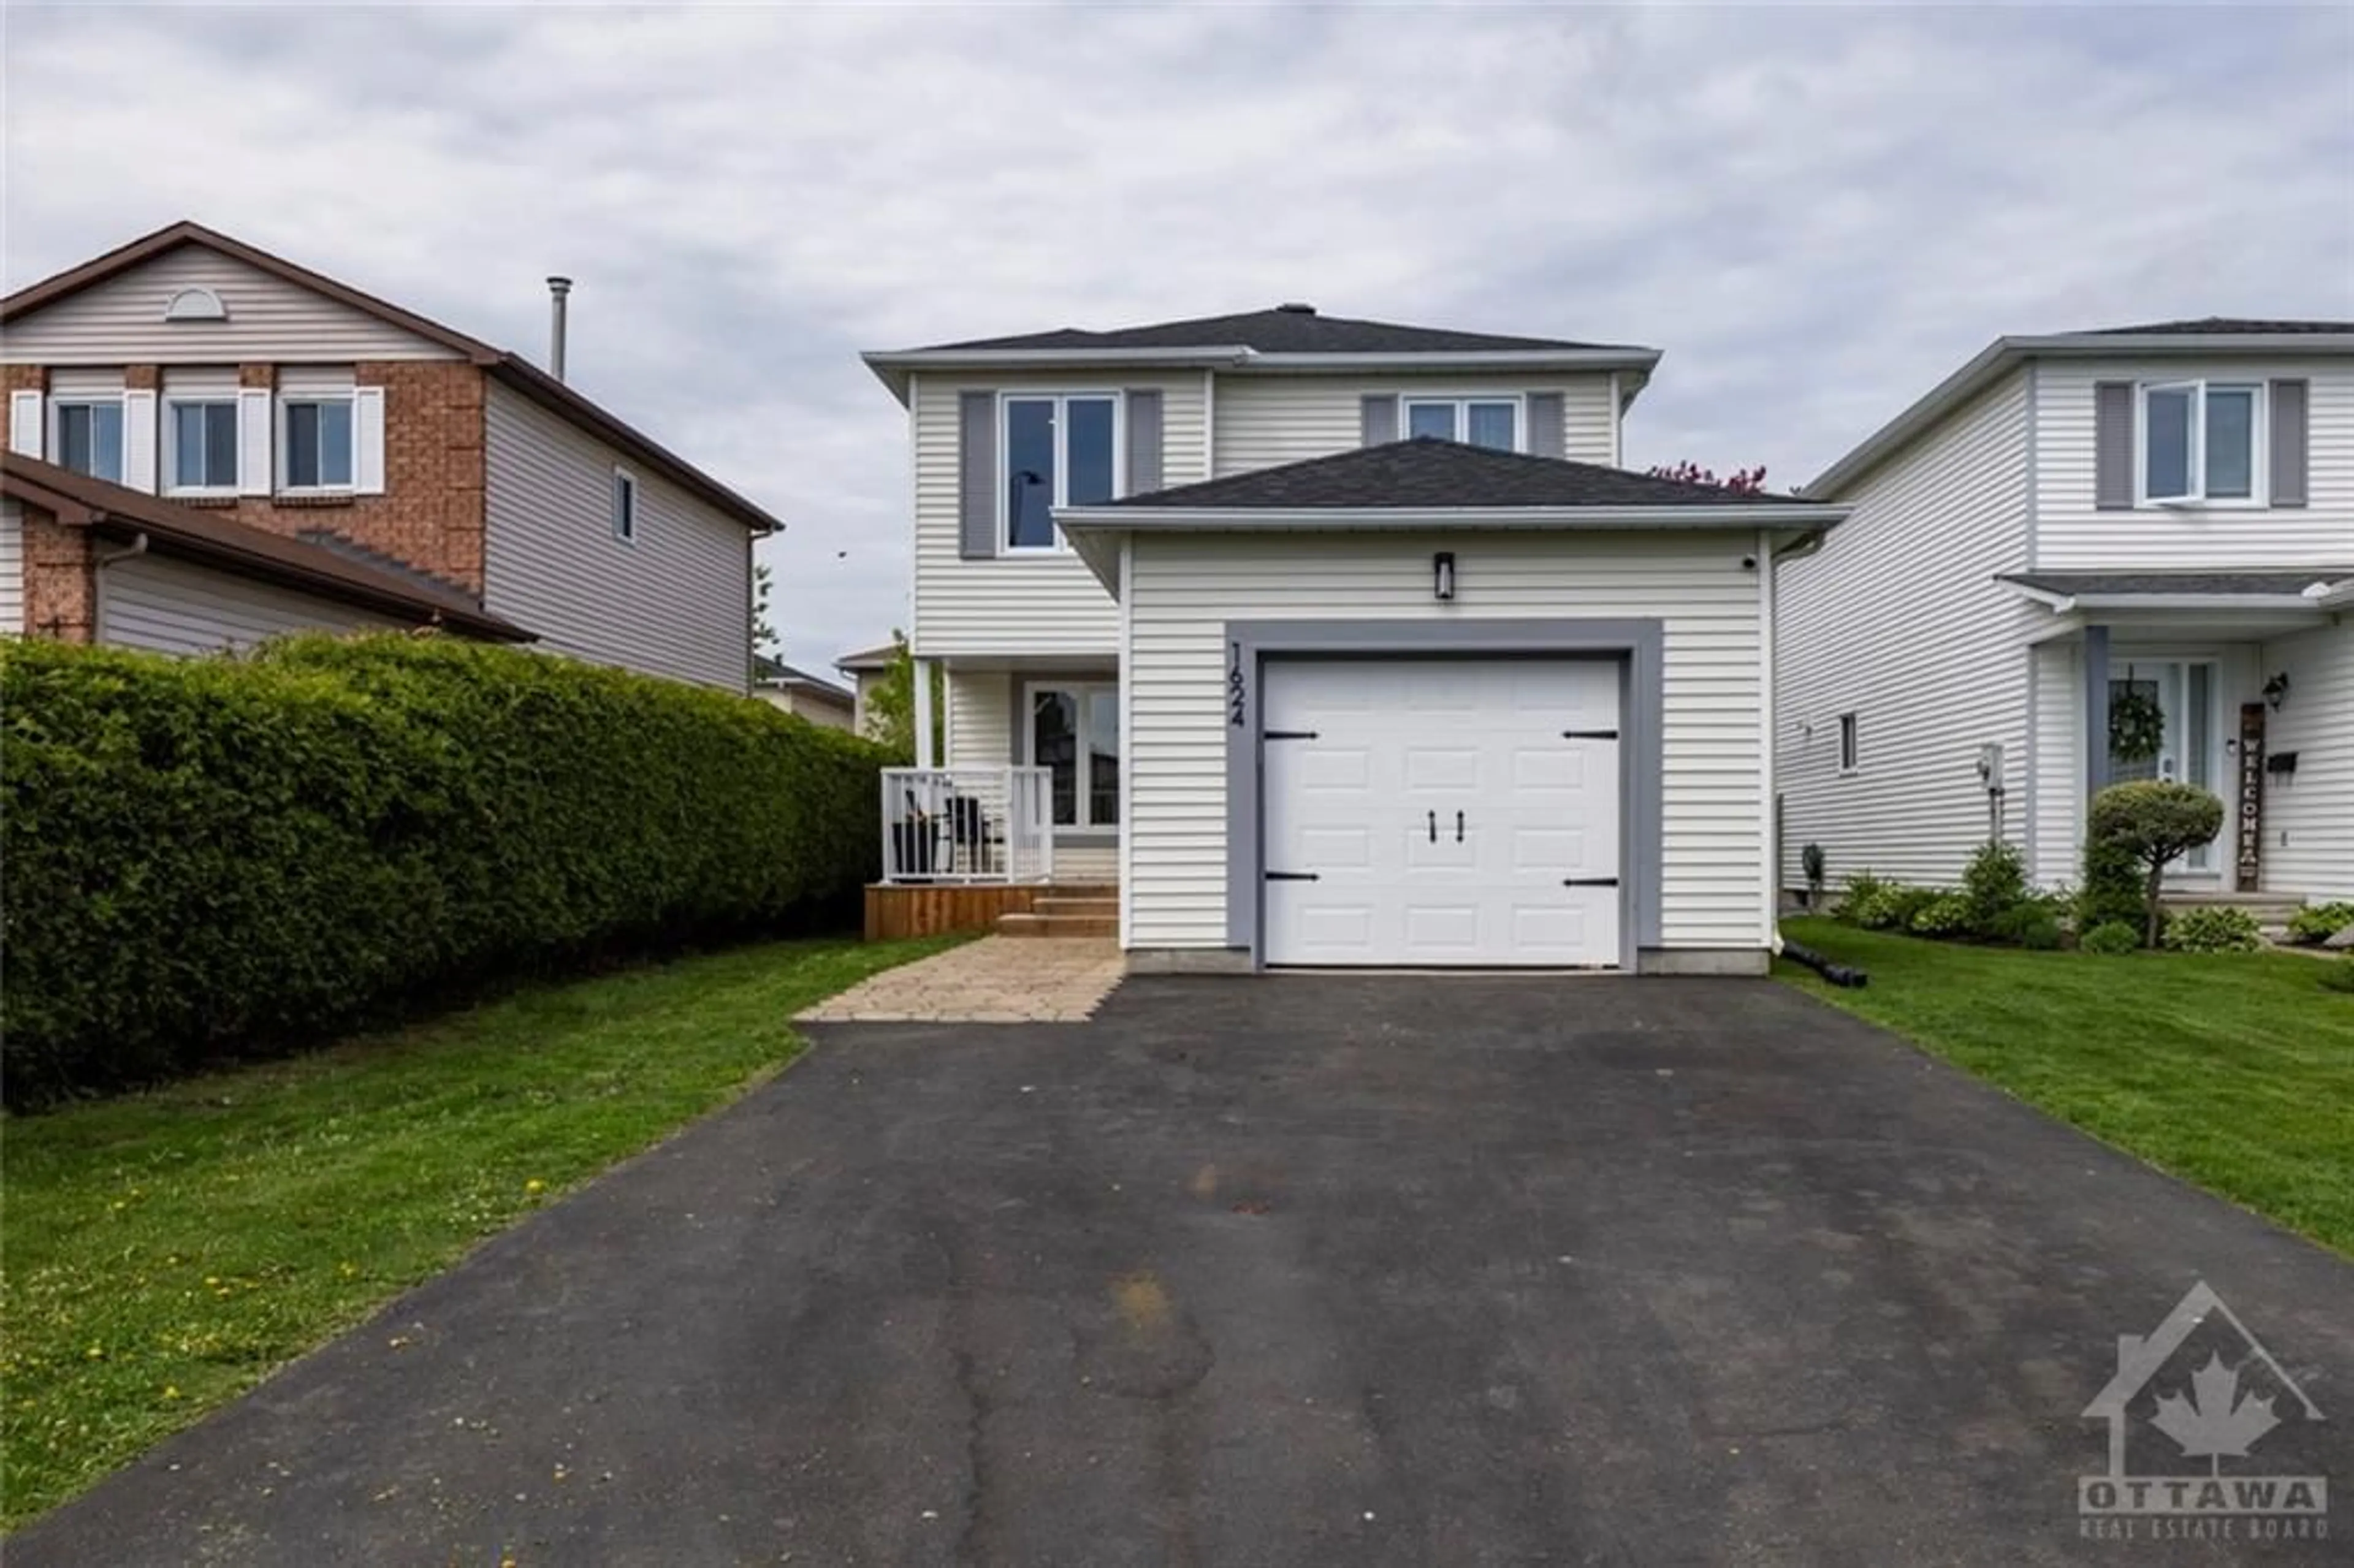 Frontside or backside of a home for 1624 TACHE Way, Ottawa Ontario K4A 2R7